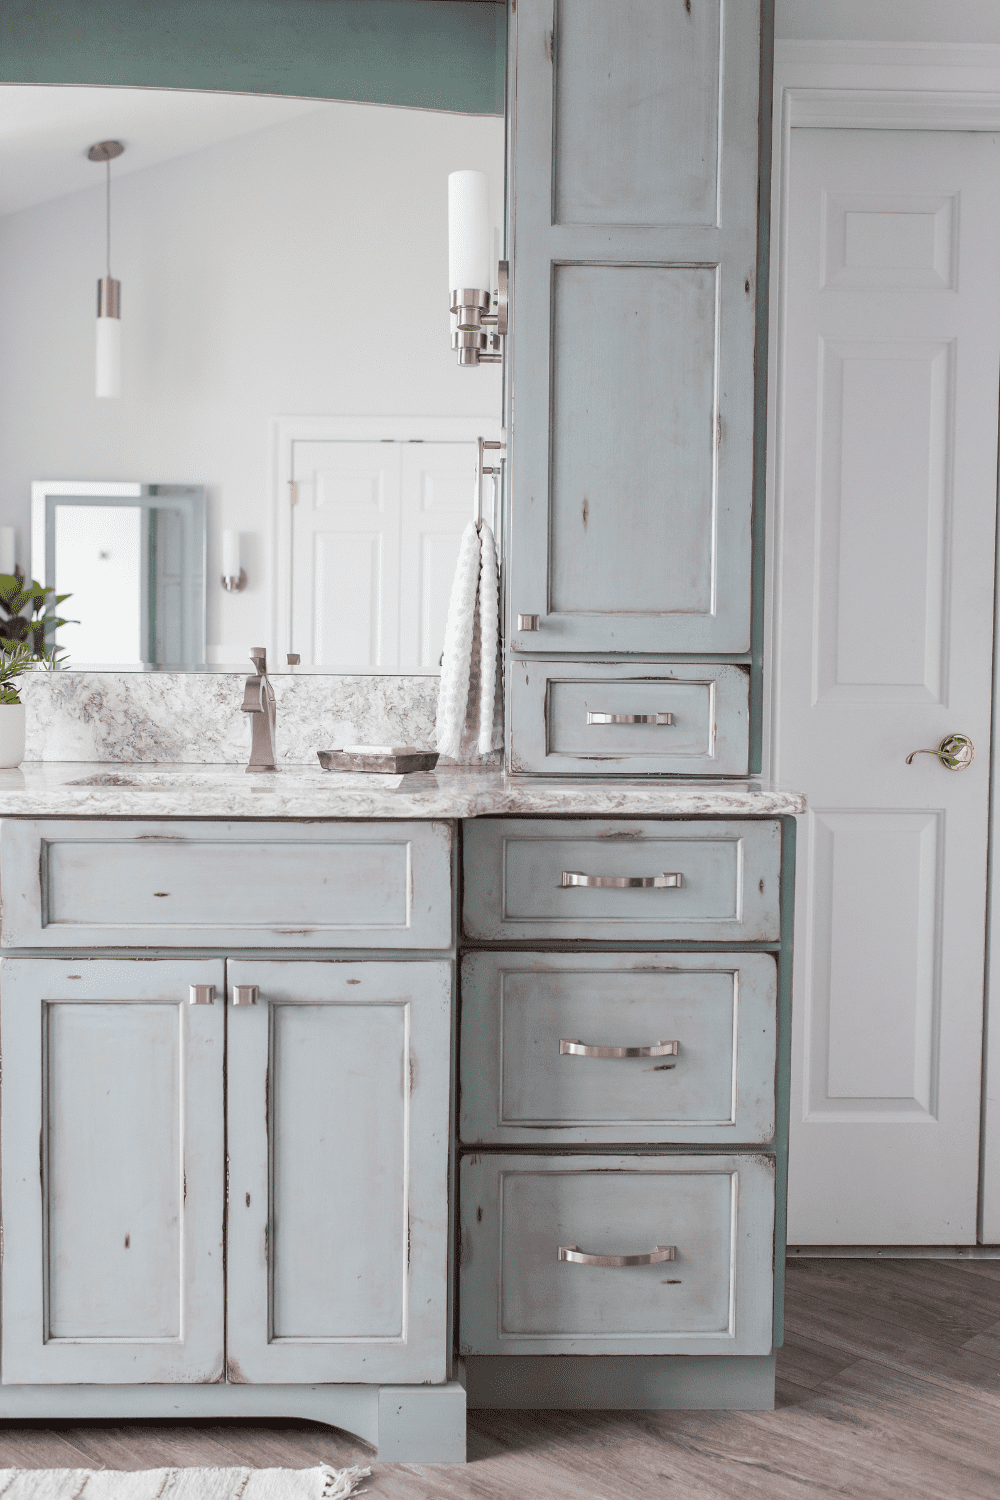 Nicholas Design Build | A master bathroom remodel with blue cabinets and a mirror.